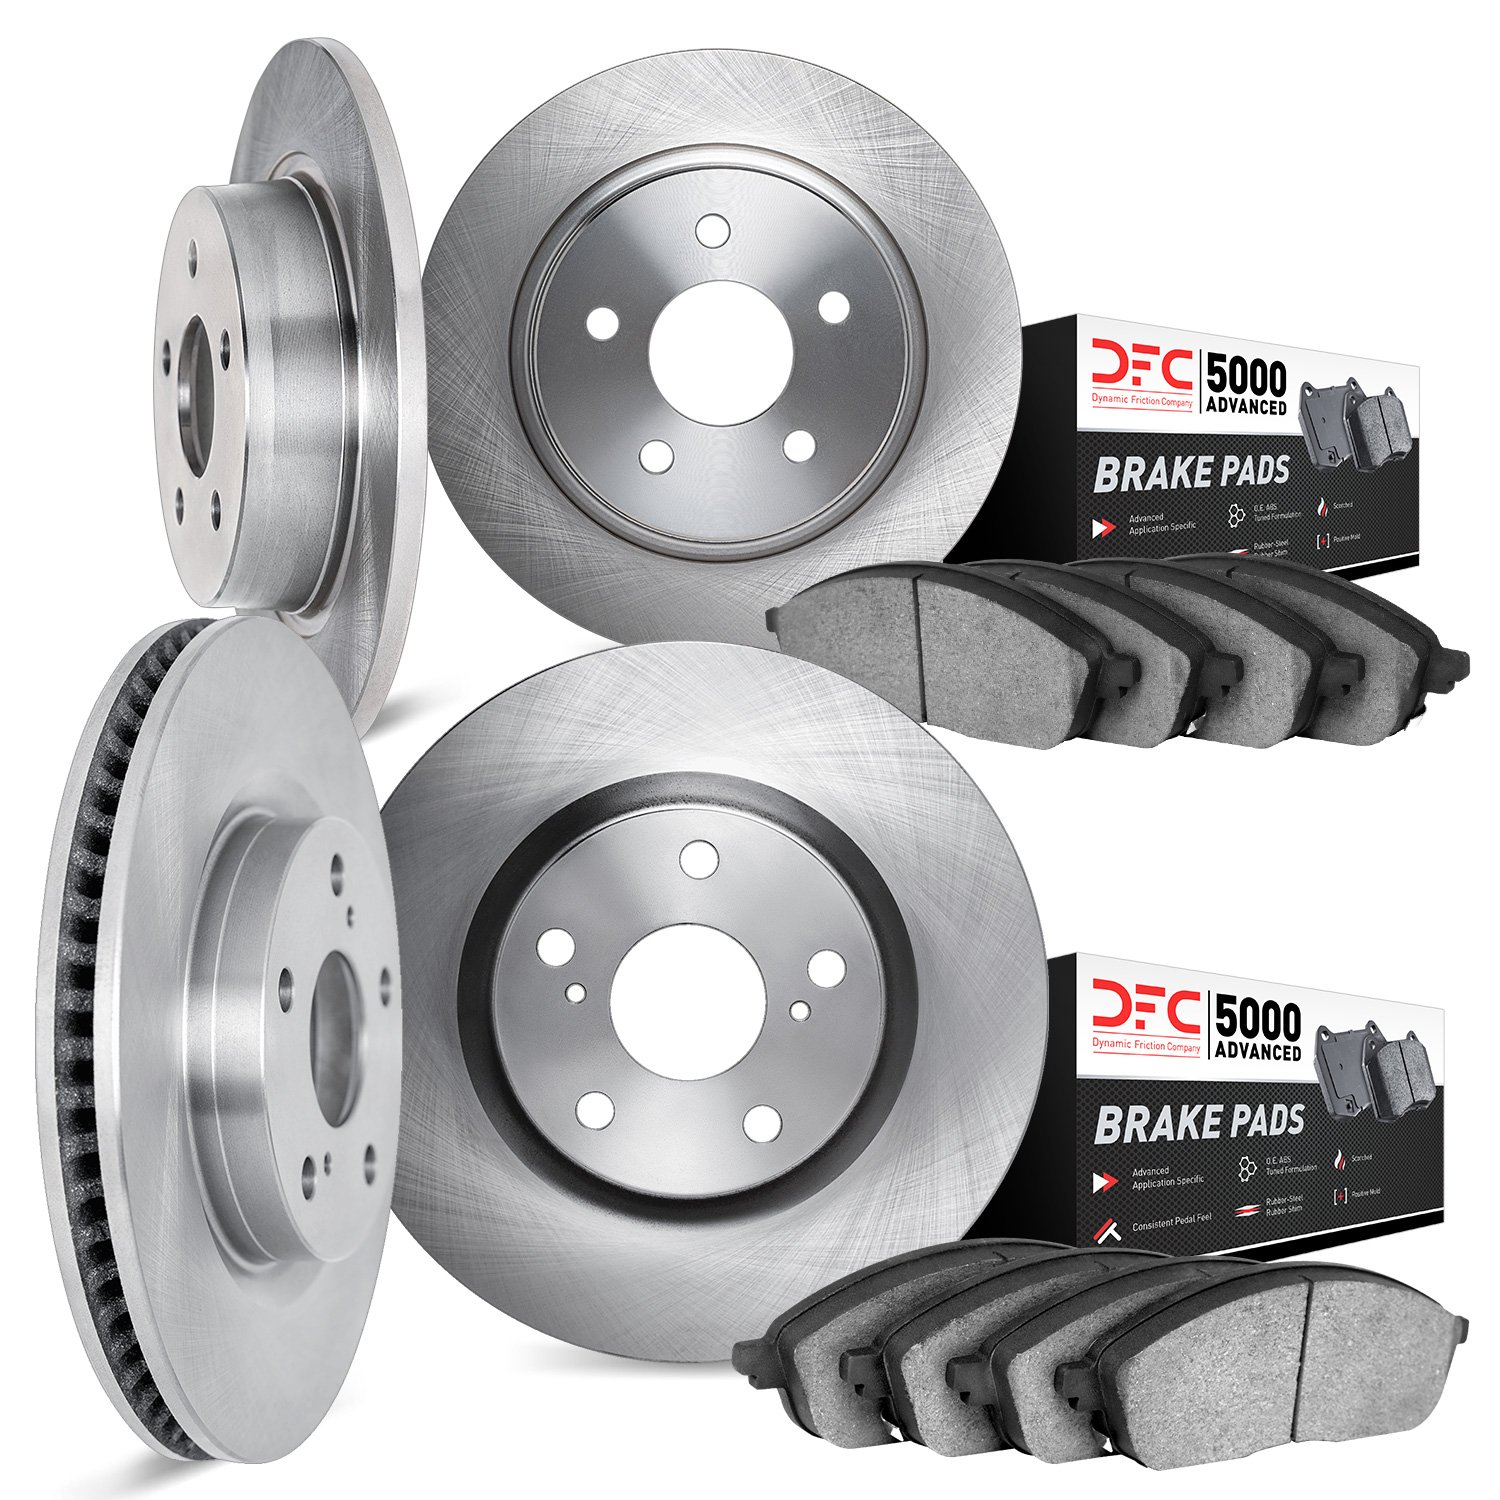 6504-63001 Brake Rotors w/5000 Advanced Brake Pads Kit, 2010-2015 Mercedes-Benz, Position: Front and Rear